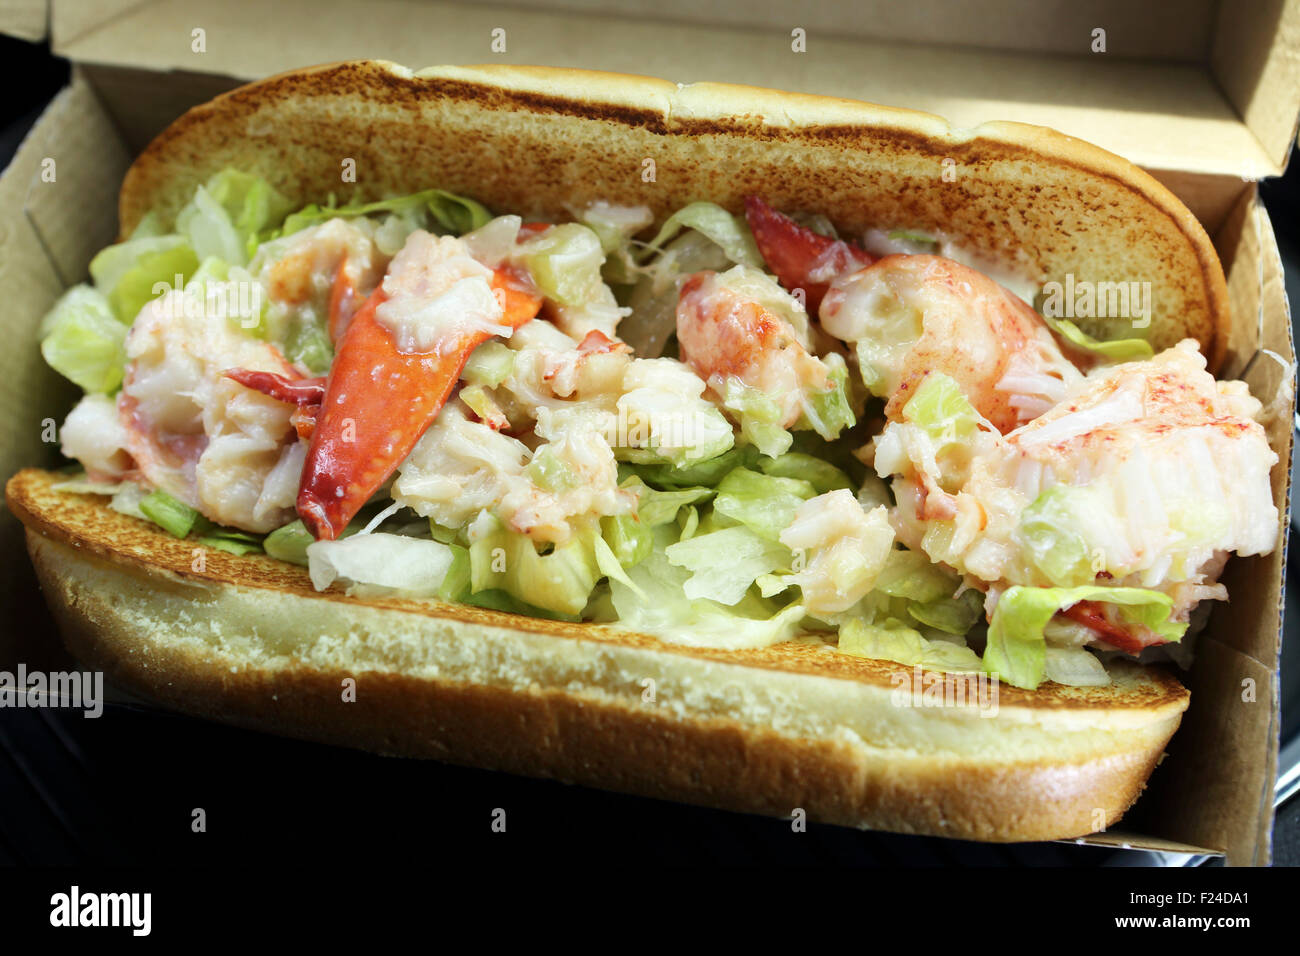 A McLobster sandwich in Nova Scotia, Canada. The lobster roll sandwiches are served at fast food restaurants in Atlantic Canada. Stock Photo